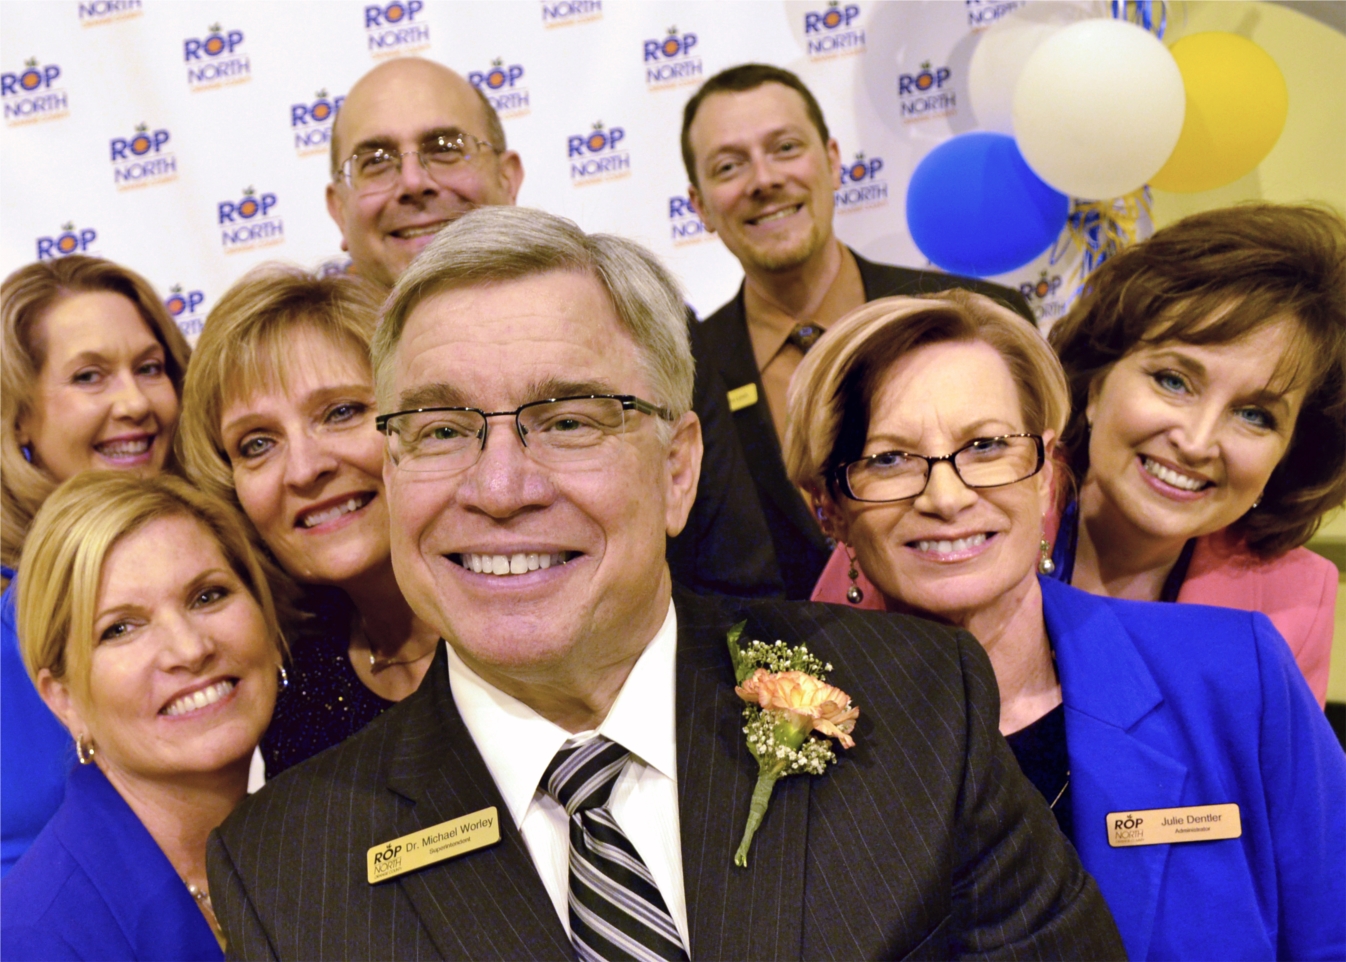 North Orange County Regional Occupational Program  administration takes a "selfie" at the 41st annual Celebration of Success Awards Ceremony. ROP honored 188 students by awarding $38,000.

Front and center, then rotating clockwise: Superintendent Michael Worley, Ed.D.; Asst. Supt. Karen Nelson (retired 9/30/14); Asst. Supt. Terri Giamarino; Administrator Linda Skipper; Asst. Supt. Howard Burkett; Administrator Dana Lynch; Administrator Gail Kairis; Coordinator Curriculum and Instruction Julie Dentler.